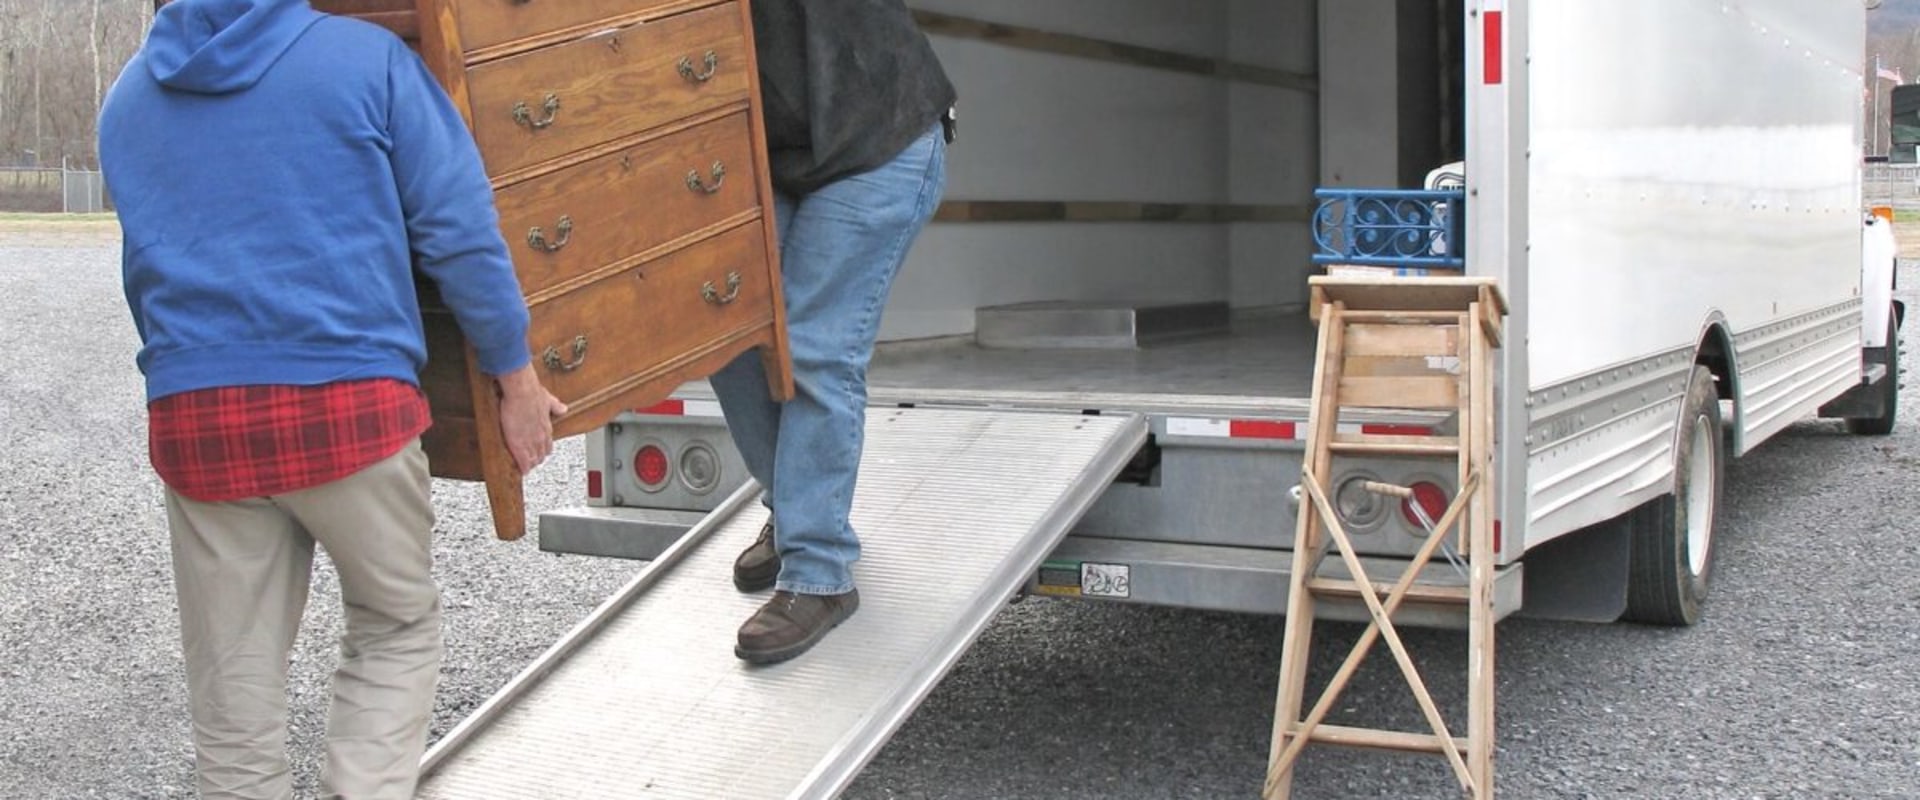 How Long Does it Take to Load and Unload a Truck?